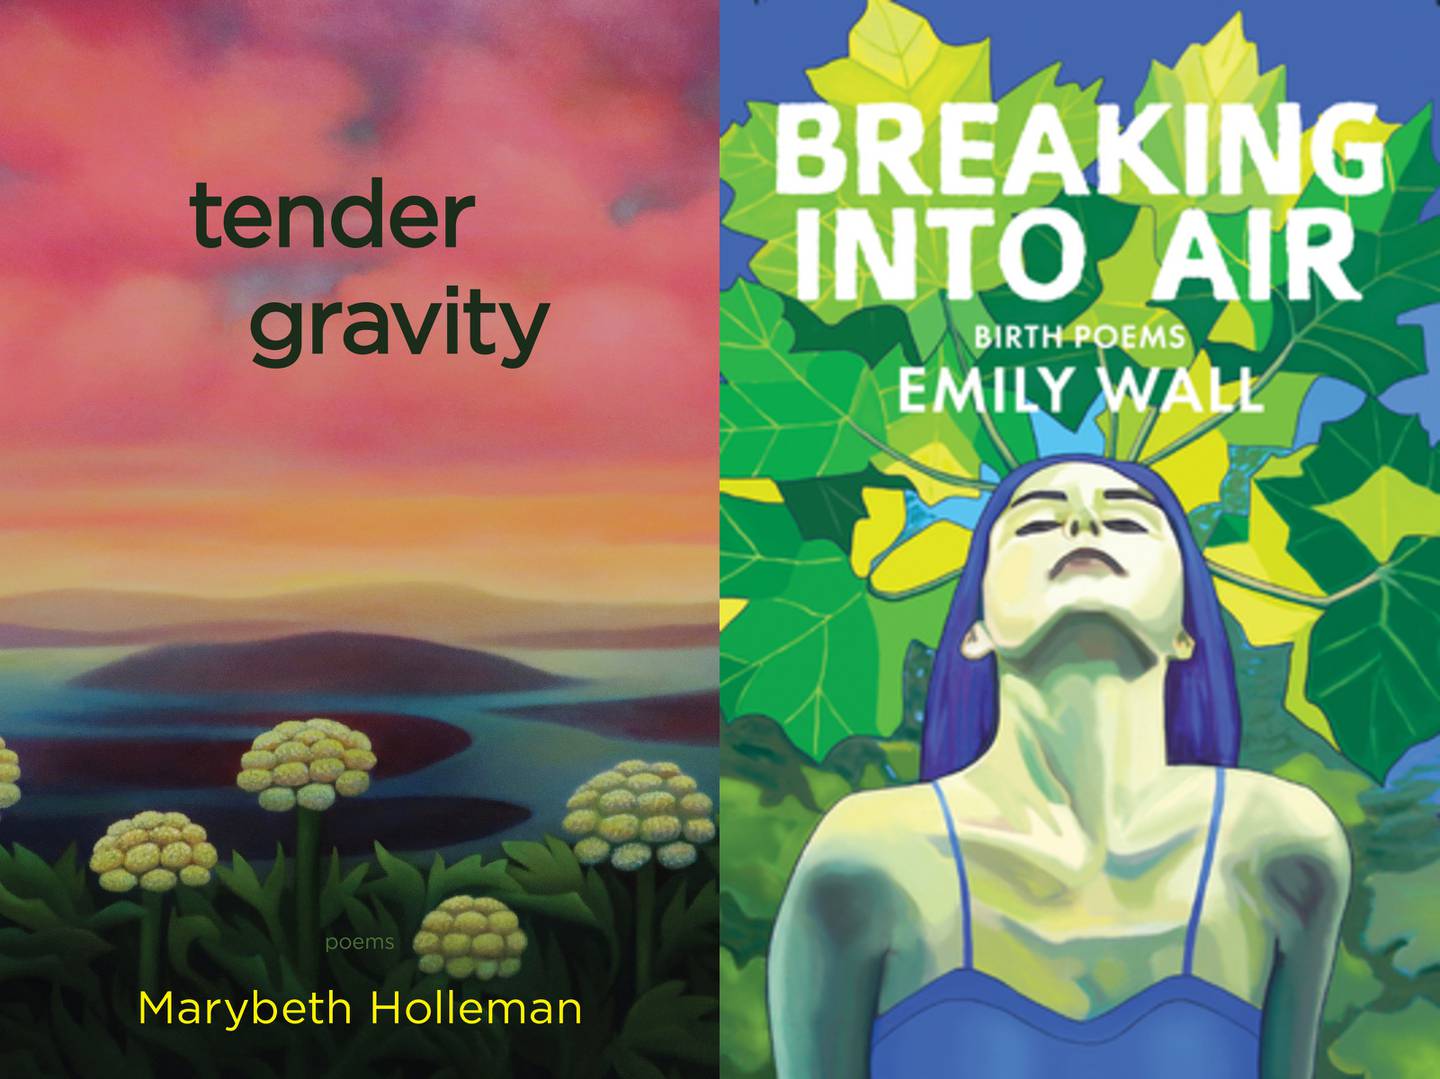 “tender gravity” by Marybeth Holleman (left) and “Breaking into Air: Birth Poems” by Emily Wall